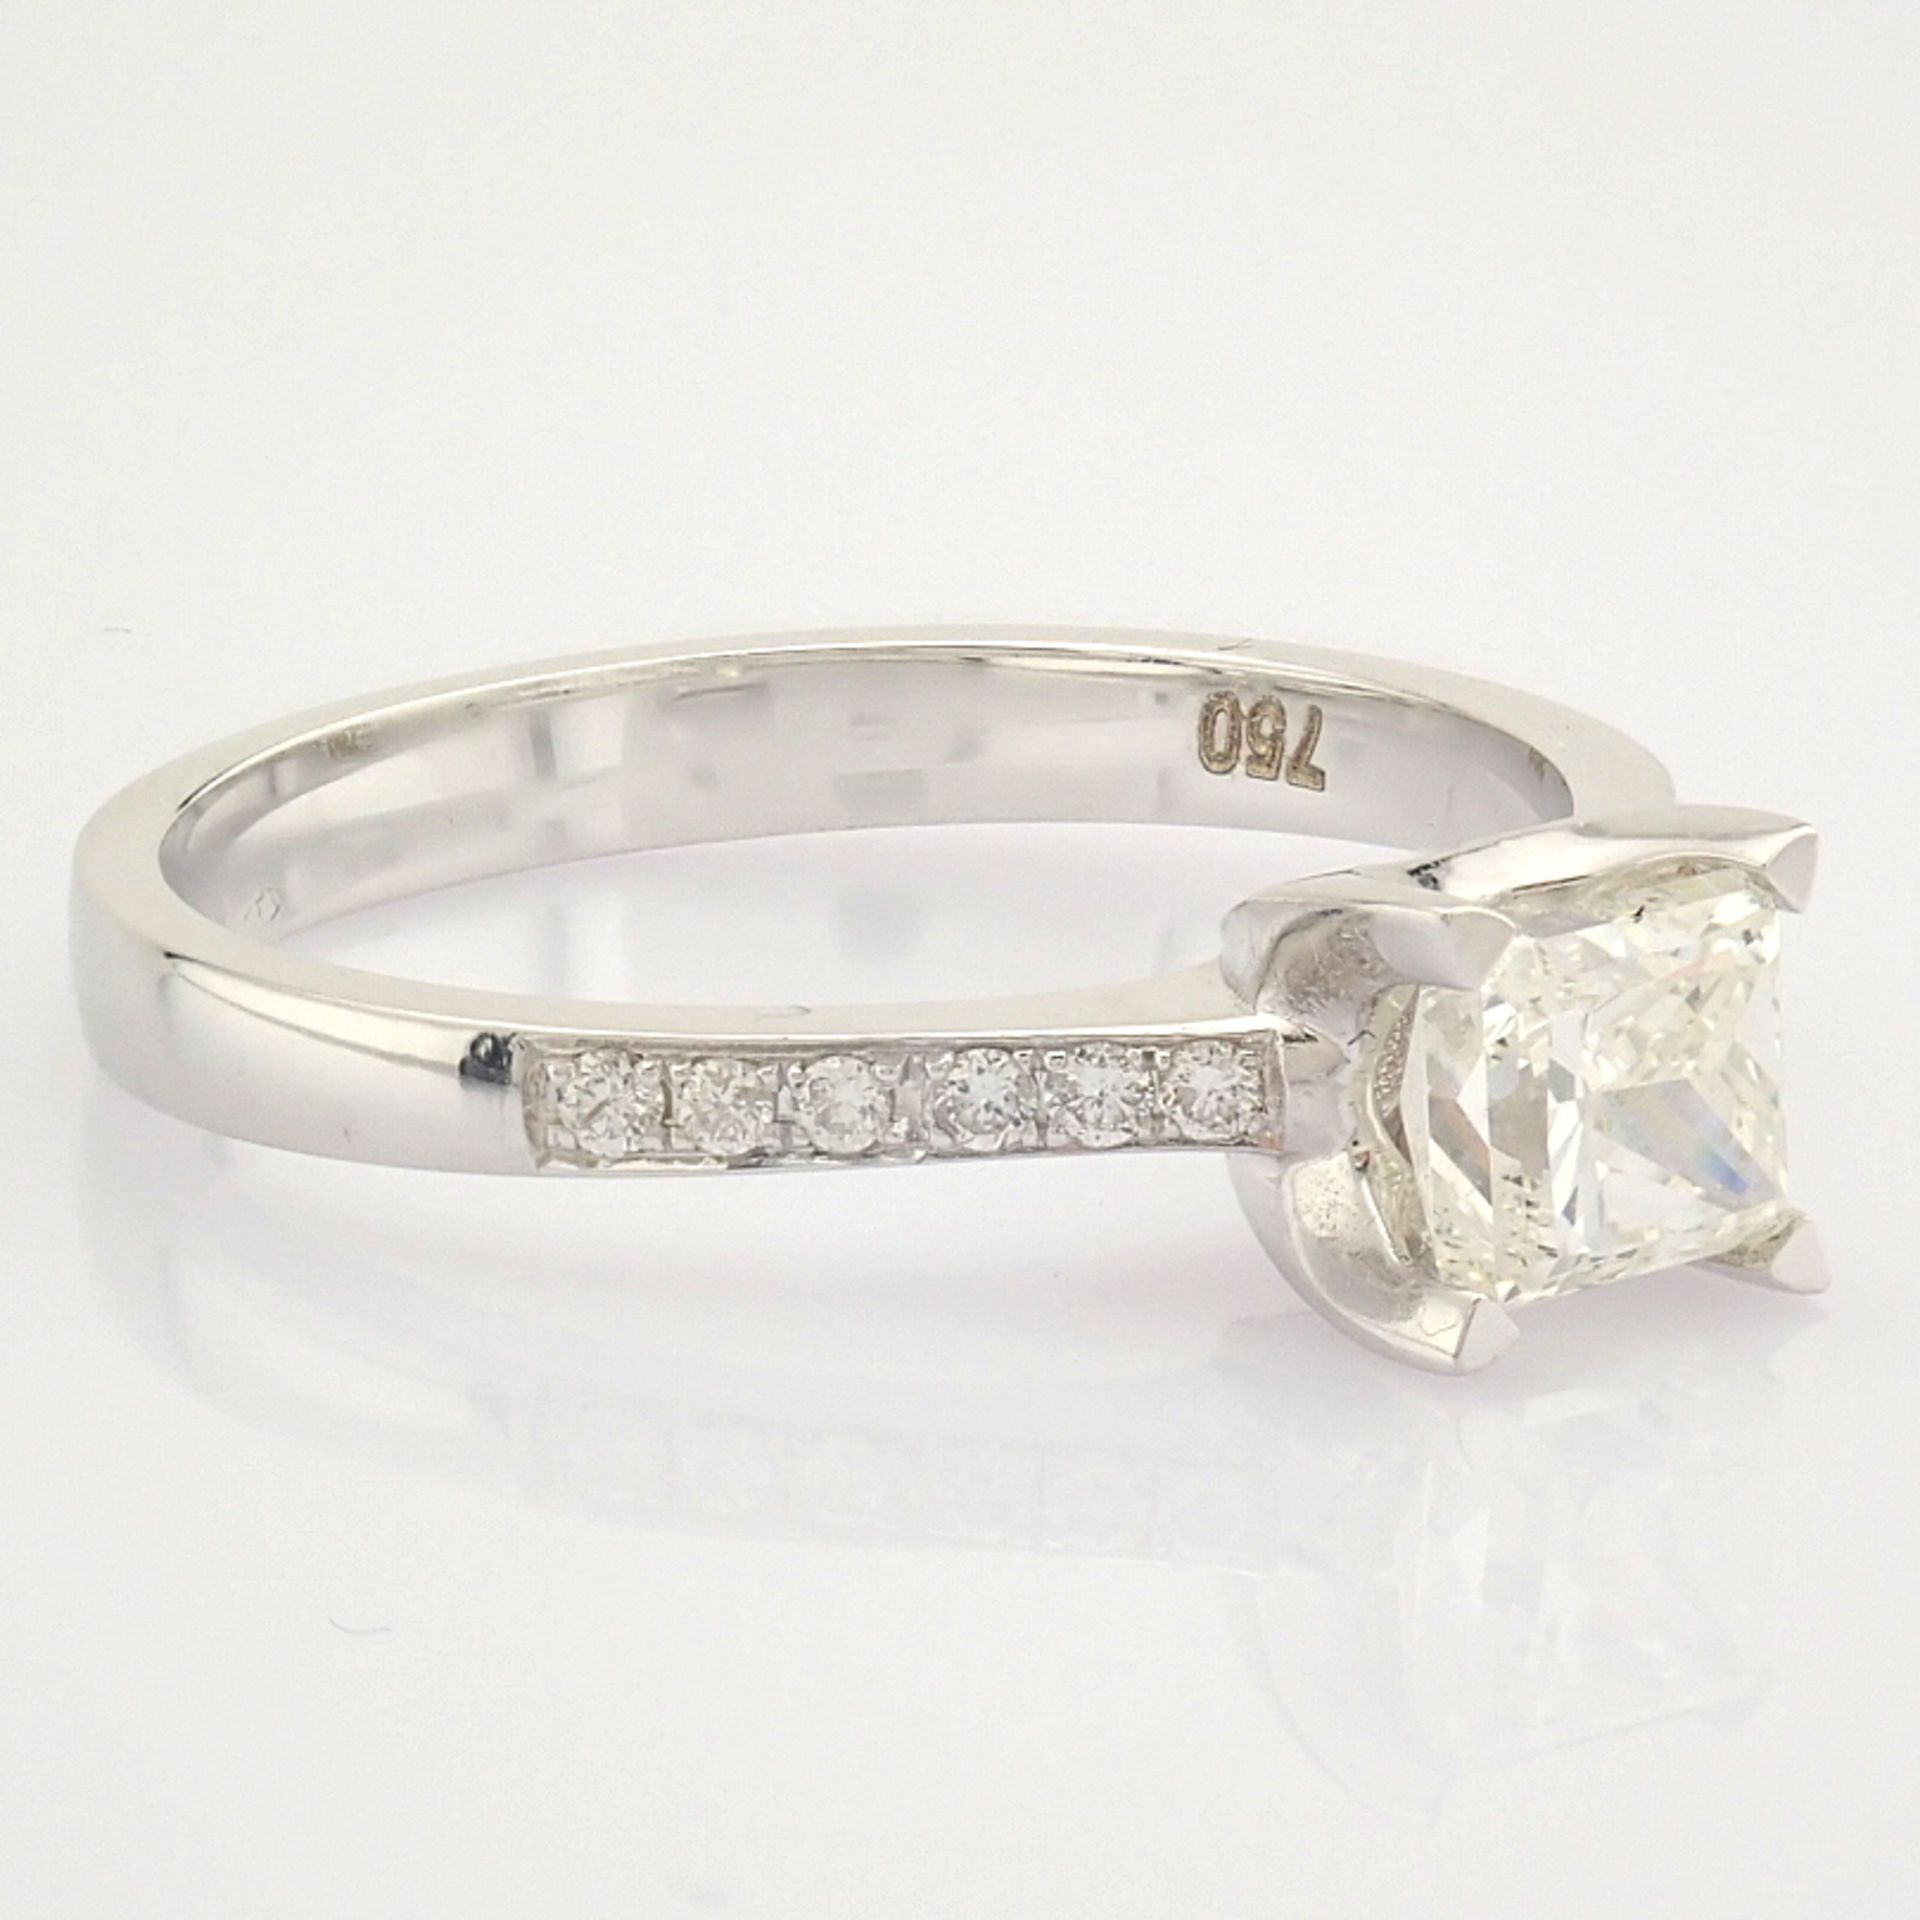 Certificated 18K White Gold Diamond Ring (Total 0.77 ct Stone) - Image 8 of 9